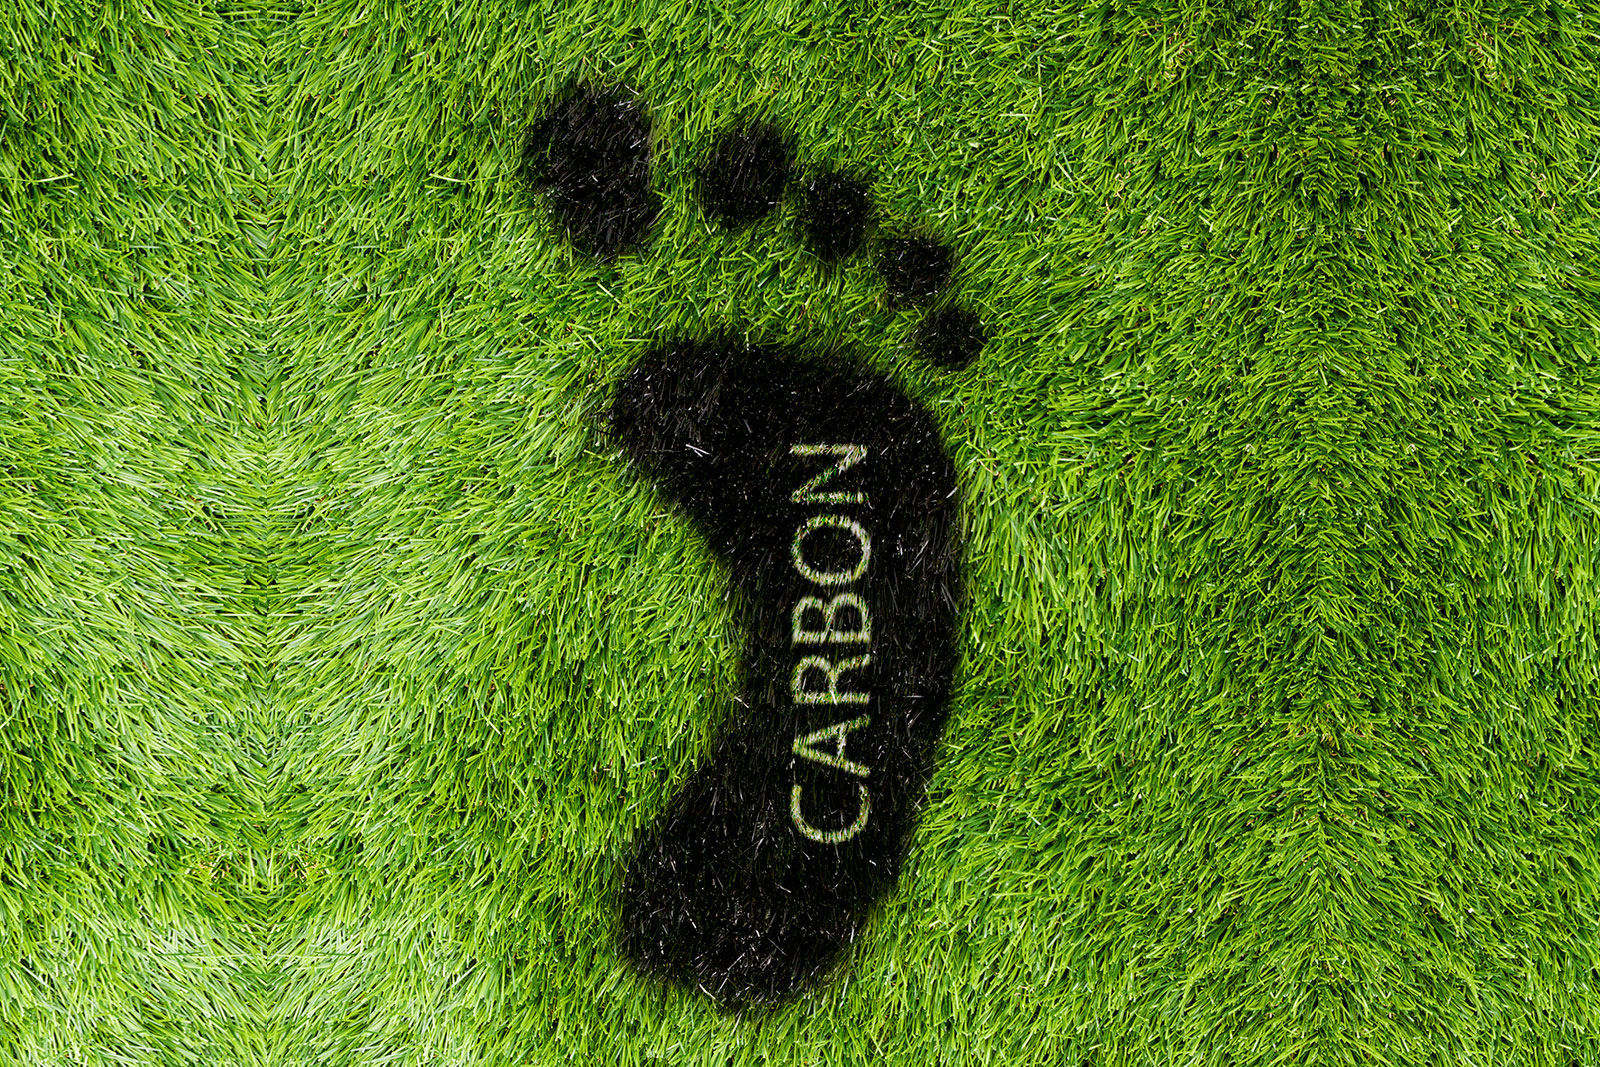 How can we reduce the carbon footprint?